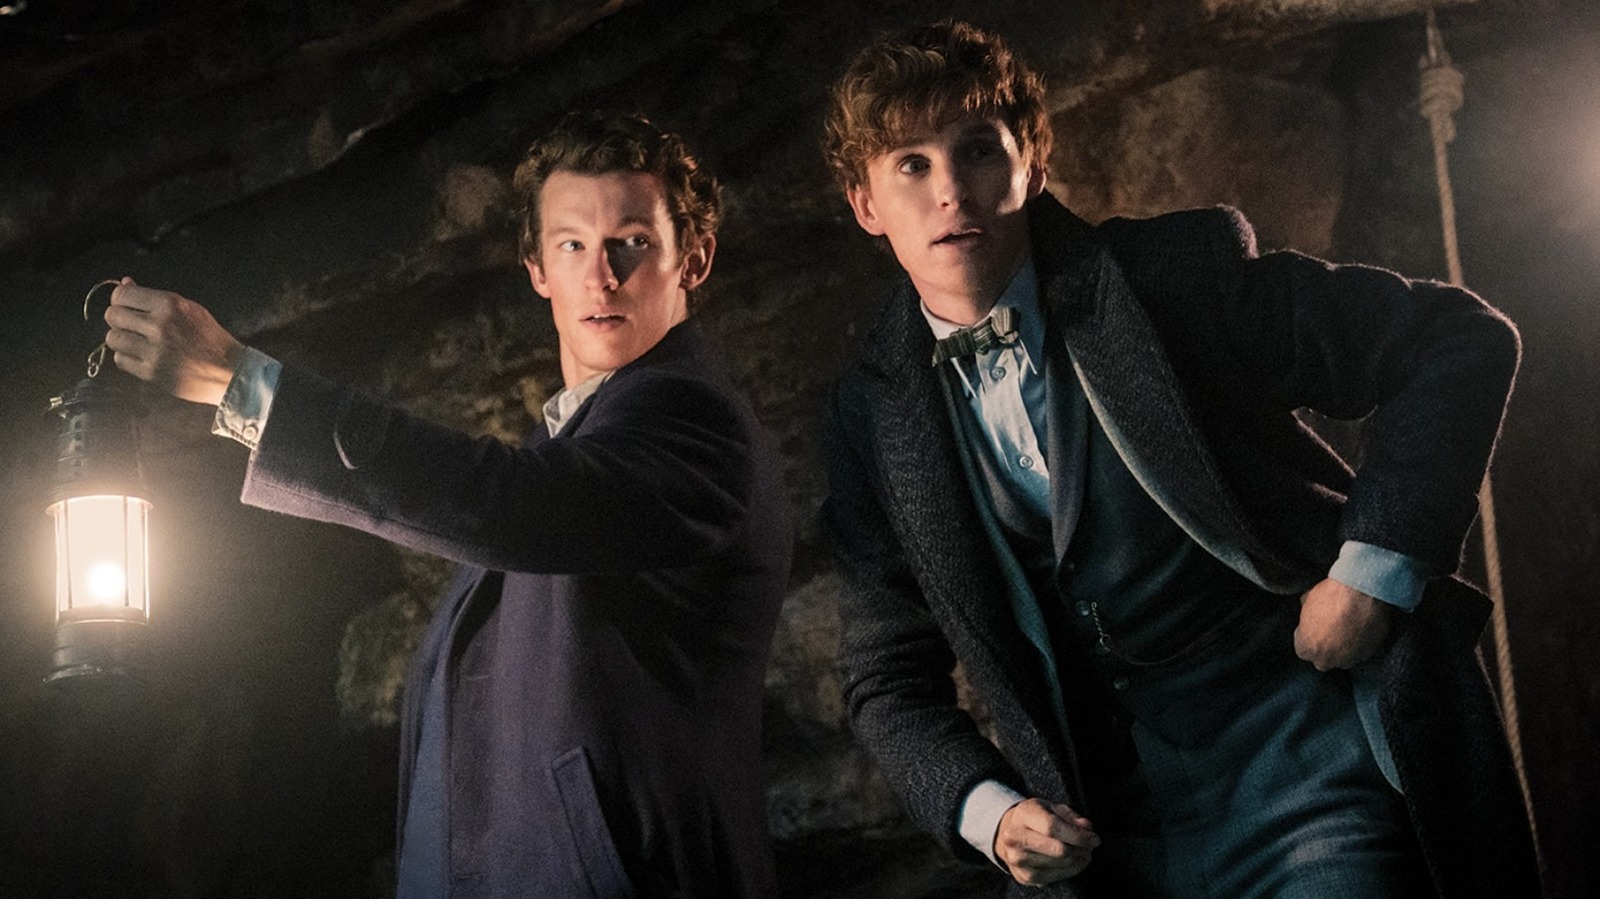 Is Fantastic Beasts 4 still relevant, or are we done with Newt Scamander?